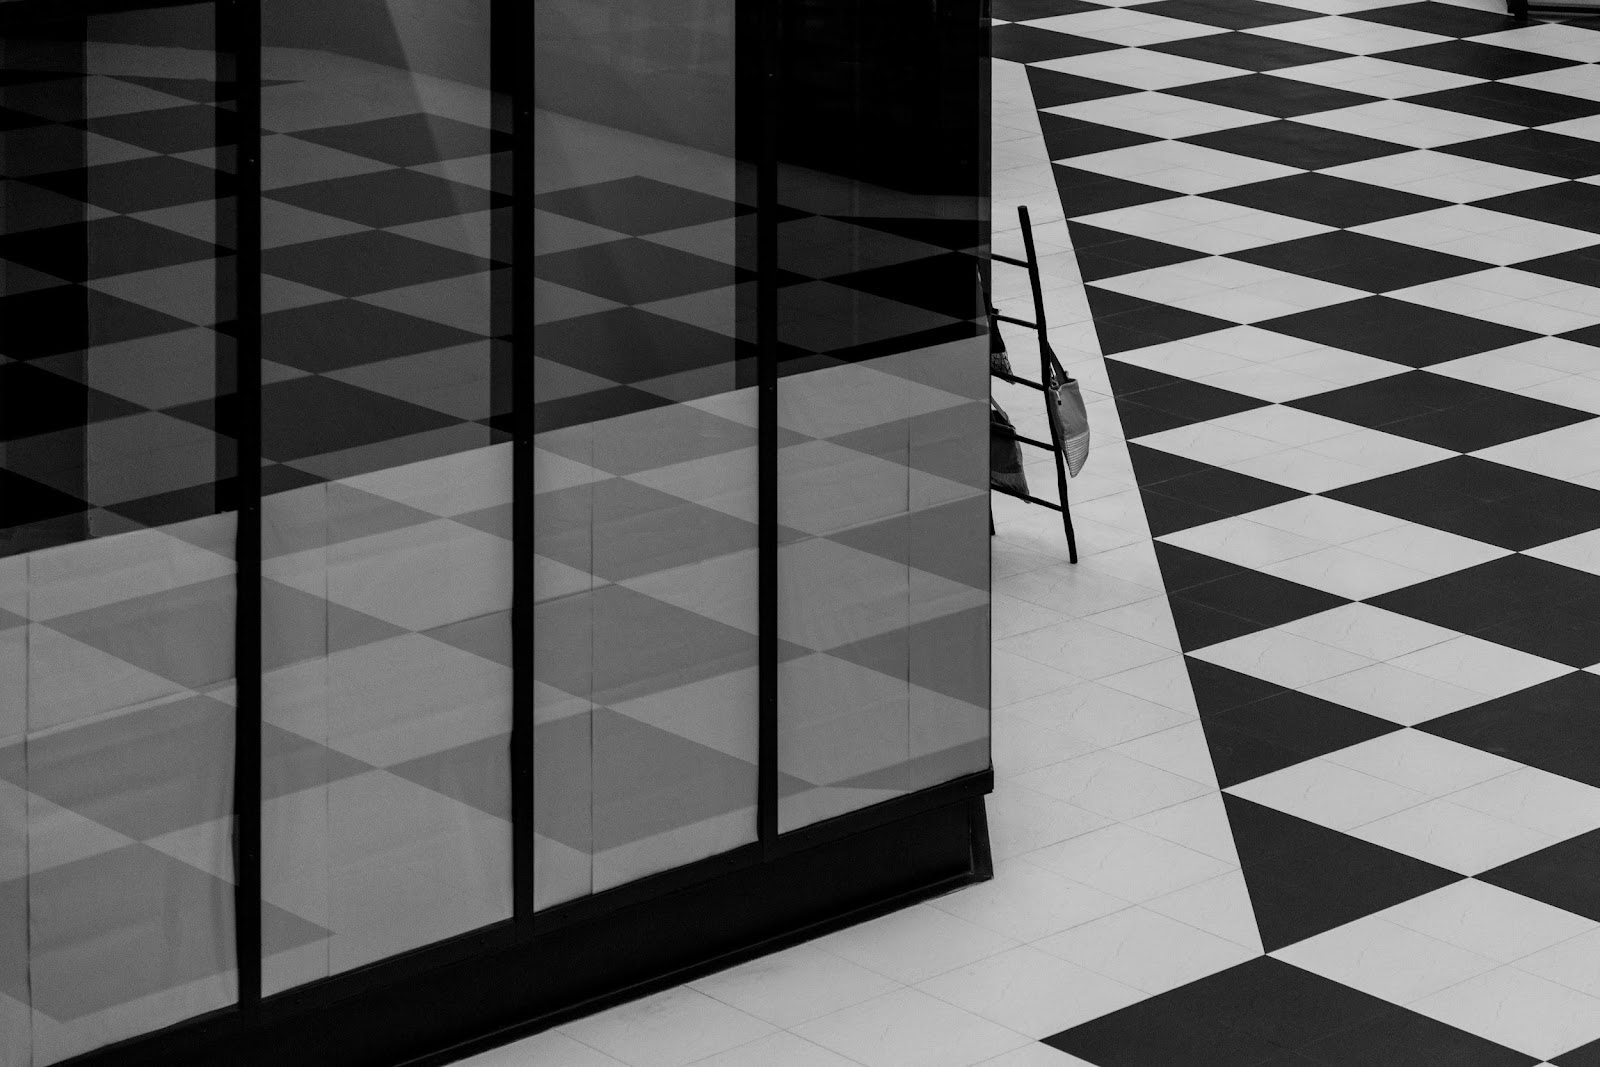 Choosing the right tile size is central to creating aesthetically pleasing checkerboard designs